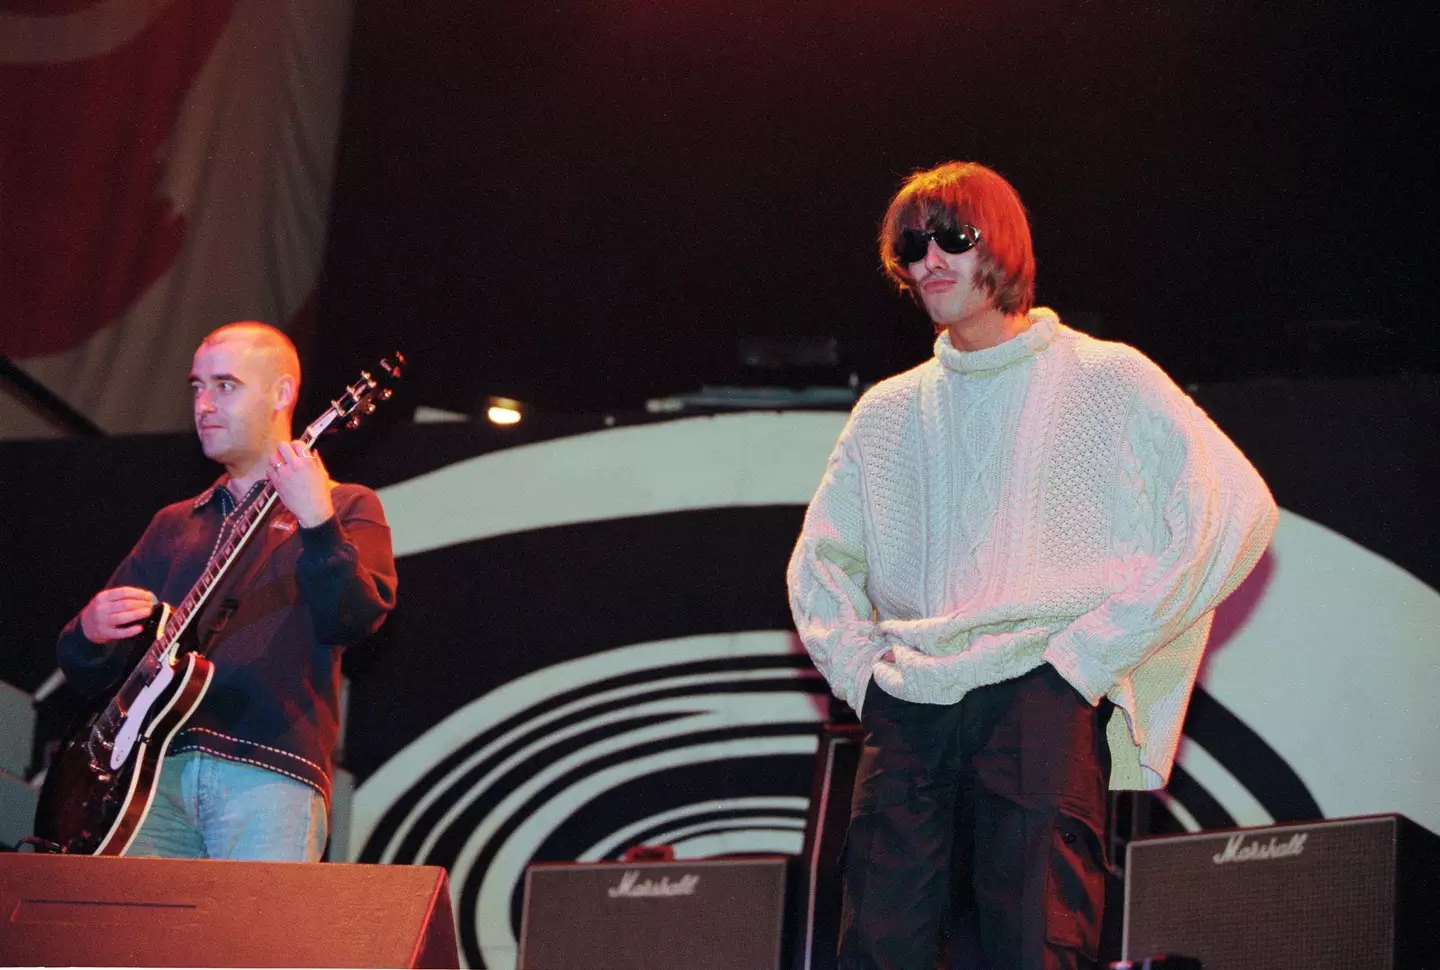 Bonehead was due to perform alongside Liam at Knebworth once again this summer.